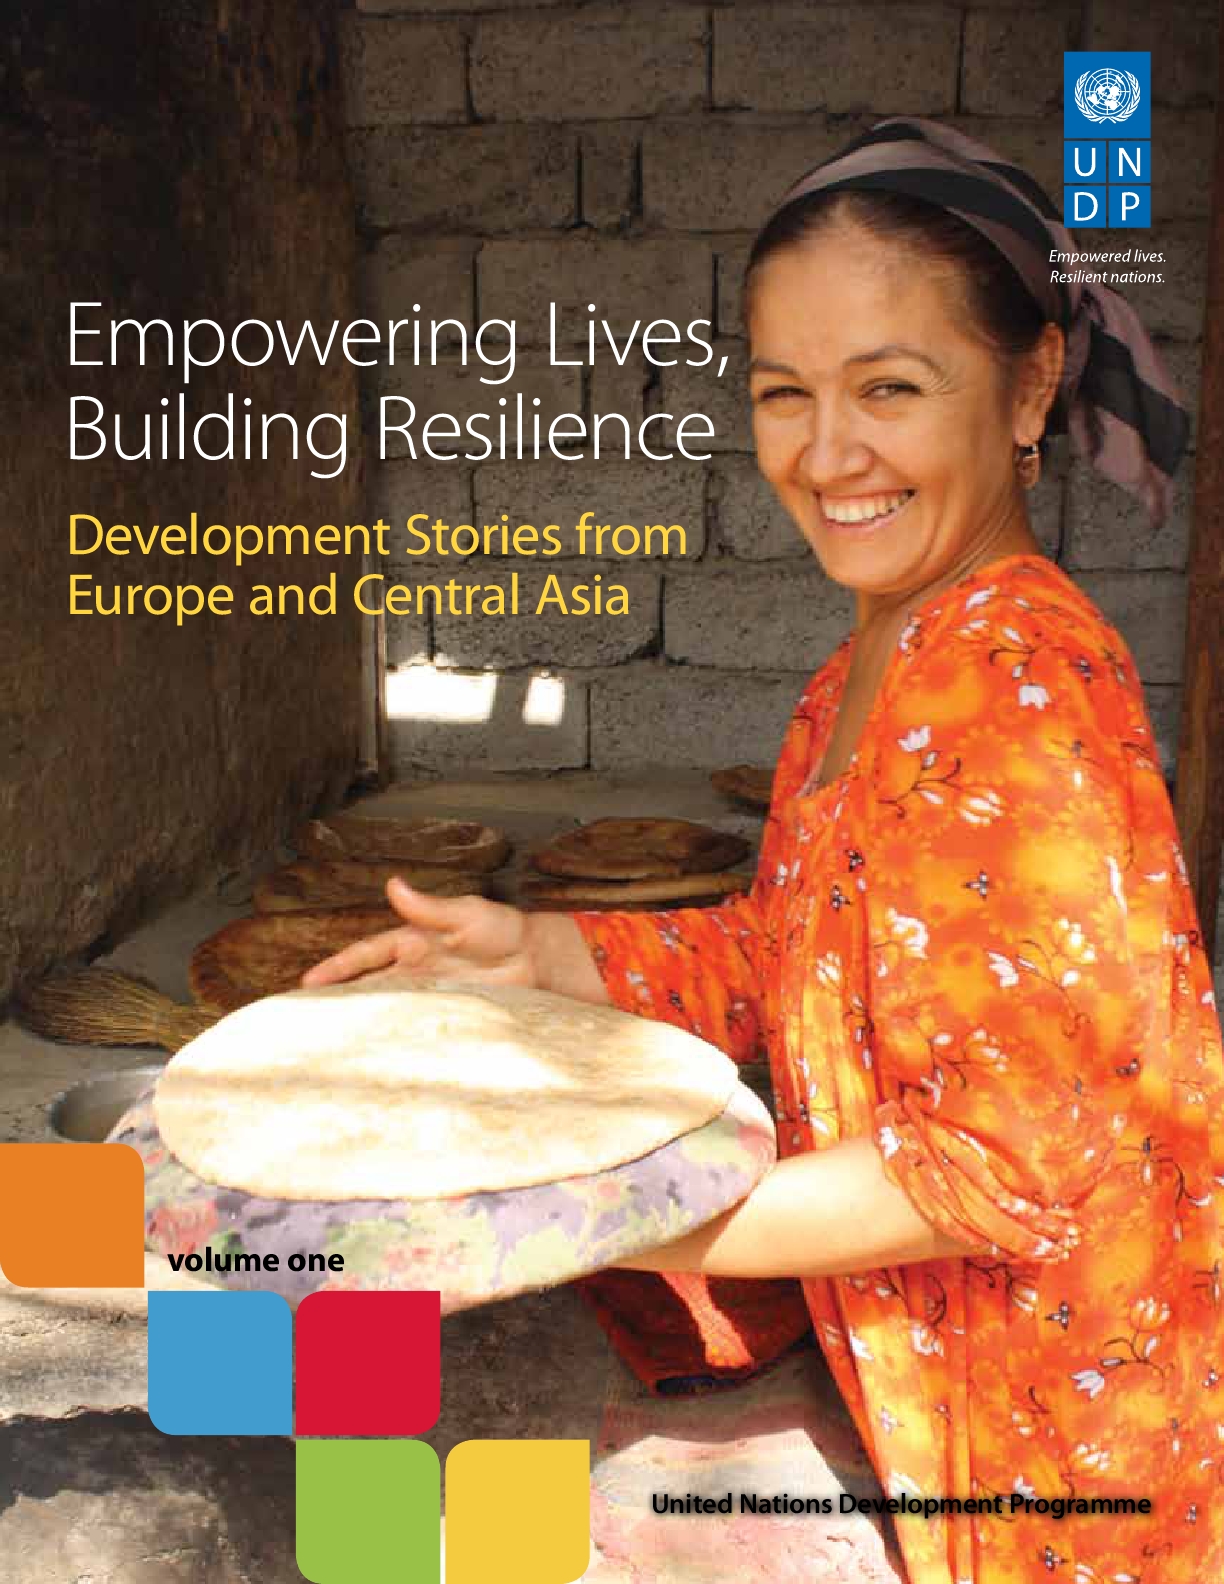 "This publication features success stories from 16 countries where UNDP support has resulted in transformative changes, including by fostering the growth of institutional and human capacities. To qualify as a transformational success, a story needed to demonstrate tangible and sustainable achievements, substantiated by data and personal testimonies. Since these depend on significant changes in institutions, attitudes and behaviours, which require long-term efforts, each story chronicles a development intervention that generally spans a 5-to-10-year period.<br><br>The success stories in this publication show how UND P has contributed to building the capabilities of government institutions, civil society and the private sector by providing seed funding, expertise and implementation support, and by bringing different parties together. Across the stories, several key factors emerge as critical to fostering long-term, transformational change. Foremost among these are: national ownership, capacity development, knowledge and innovation and partnerships."